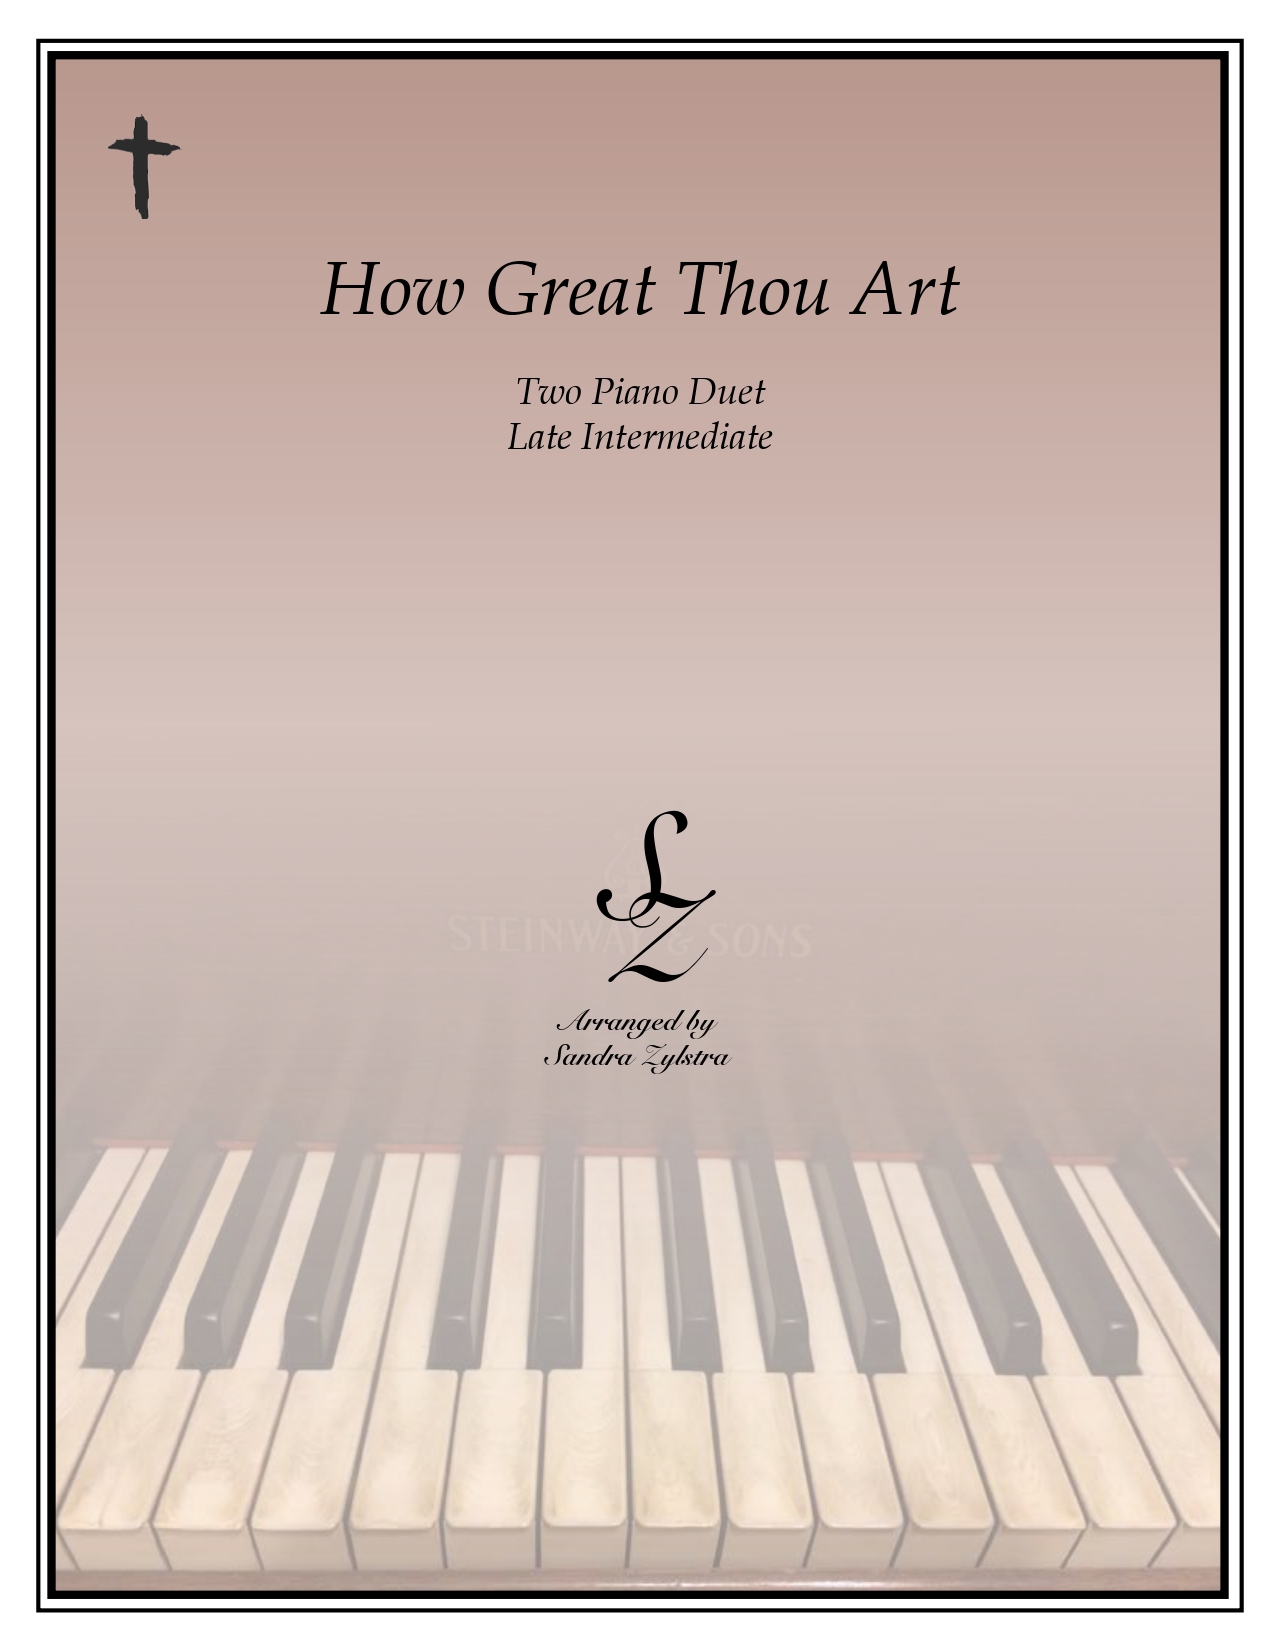 How Great Thou Art Duet cover page 00011